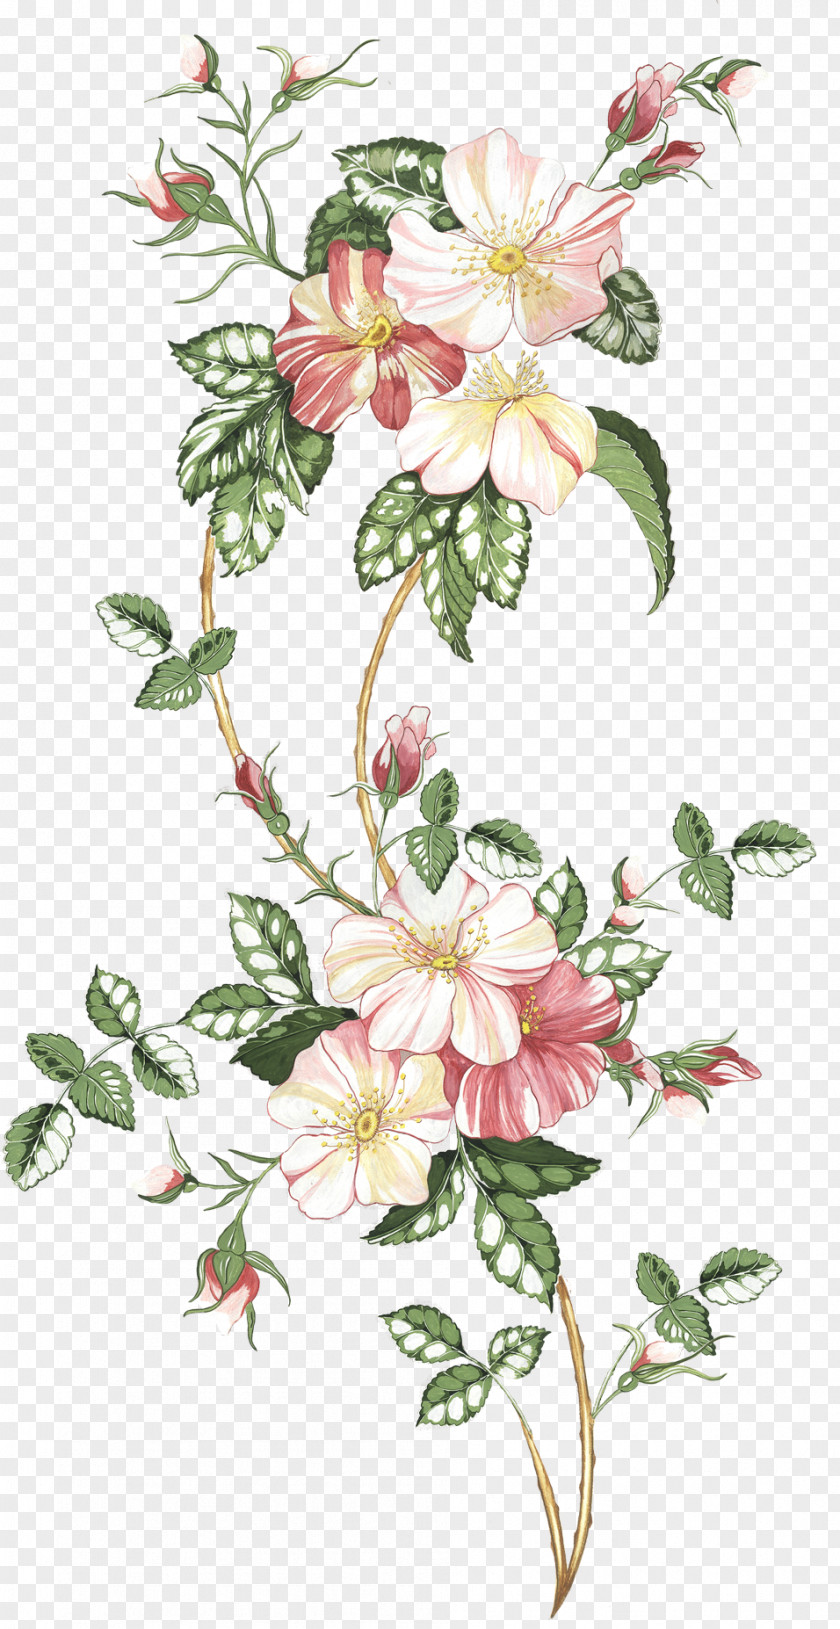 Flower Floral Design Drawing Watercolor Painting Sketch PNG